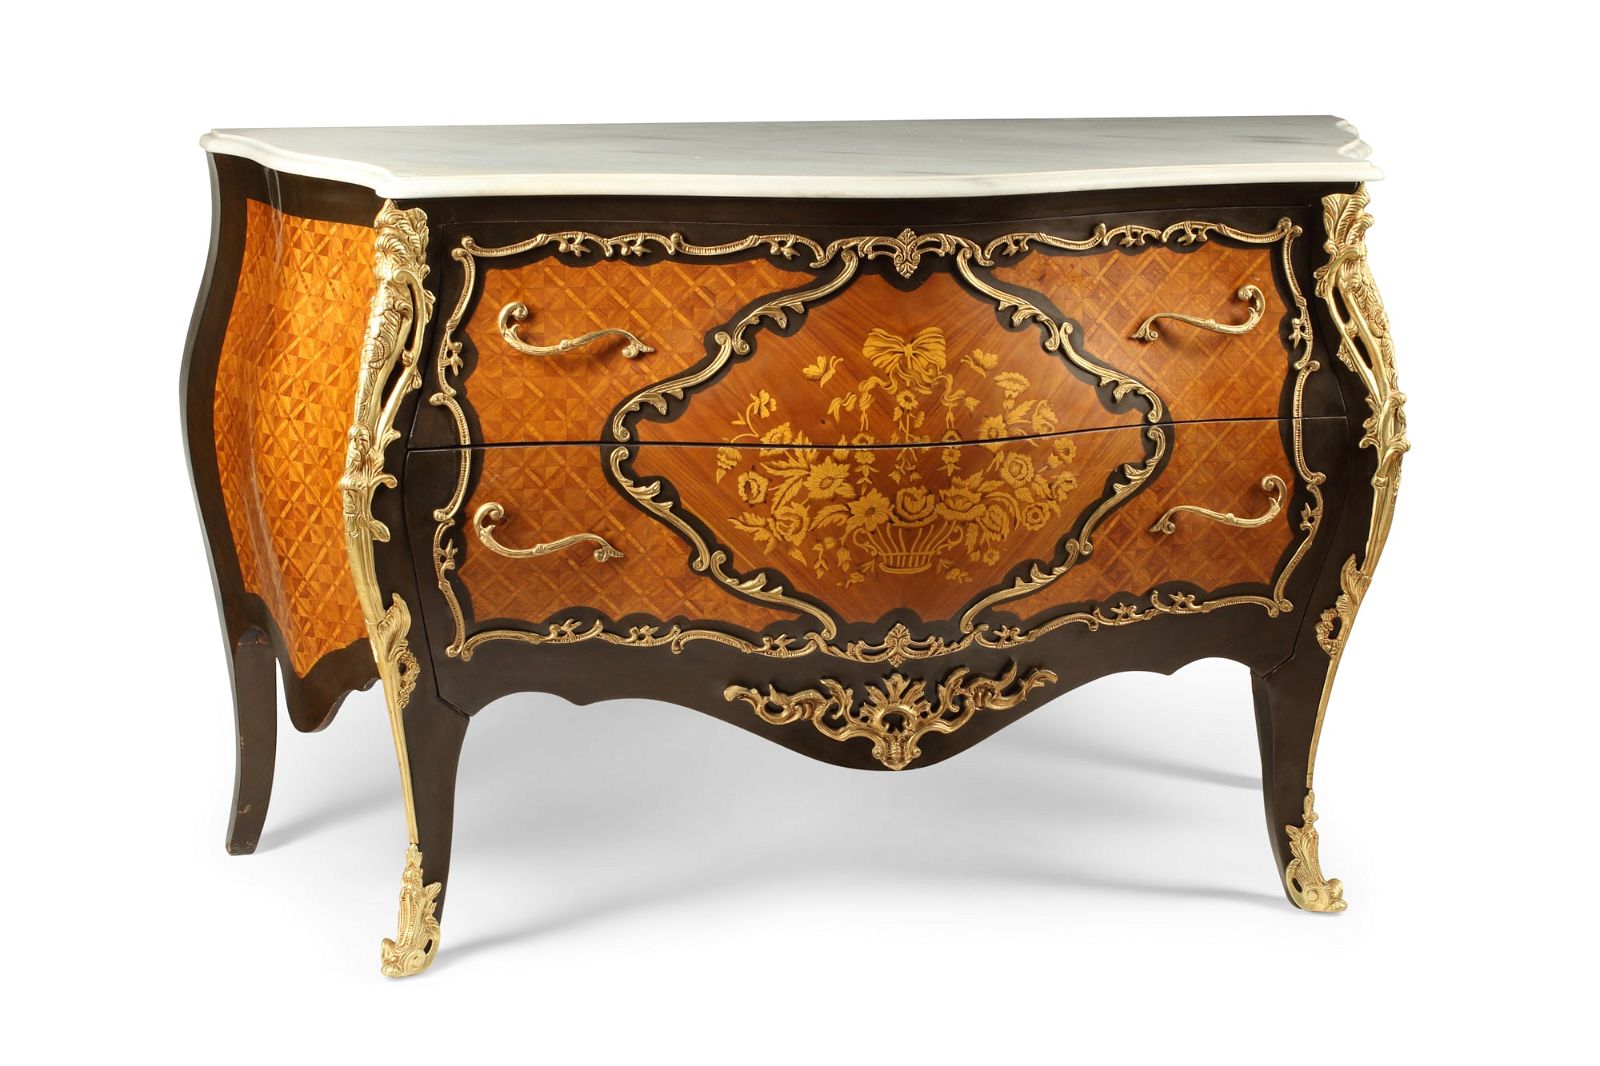 A LOUIS XV STYLE MARQUETRY COMMODEA